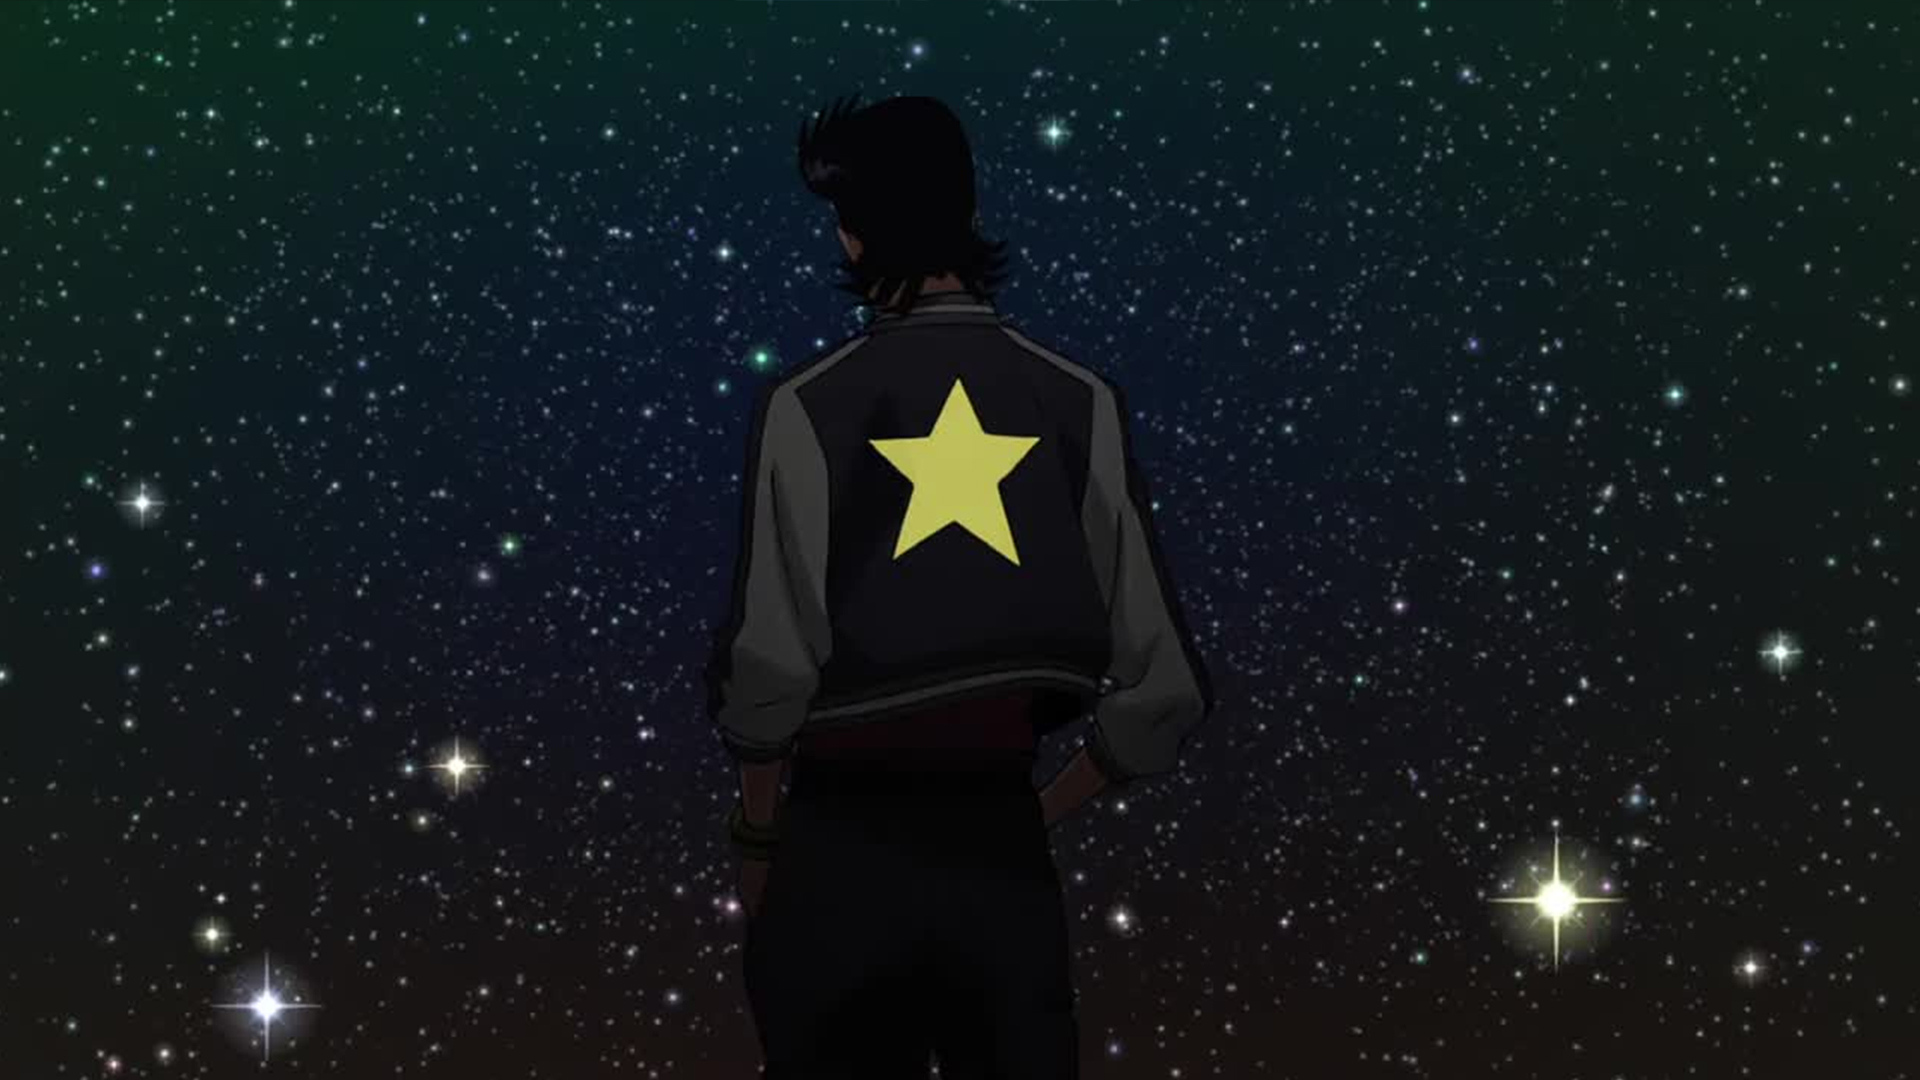 Space Dandy' Makes Its U.S. Premiere on Adult Swim - The New York Times